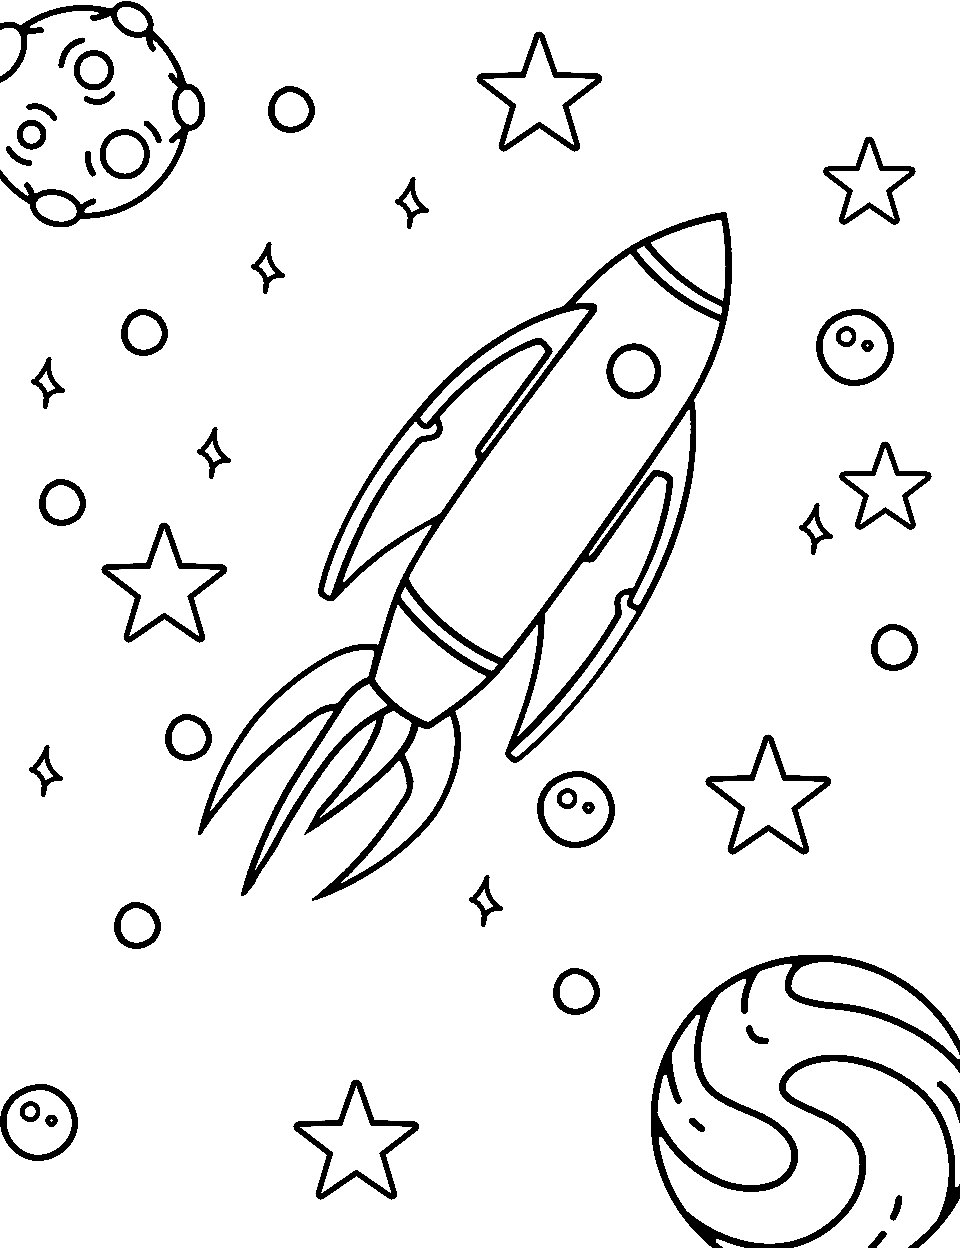 Spaceship Speed Race Coloring Page - A spaceship racing amidst the stars and planets.